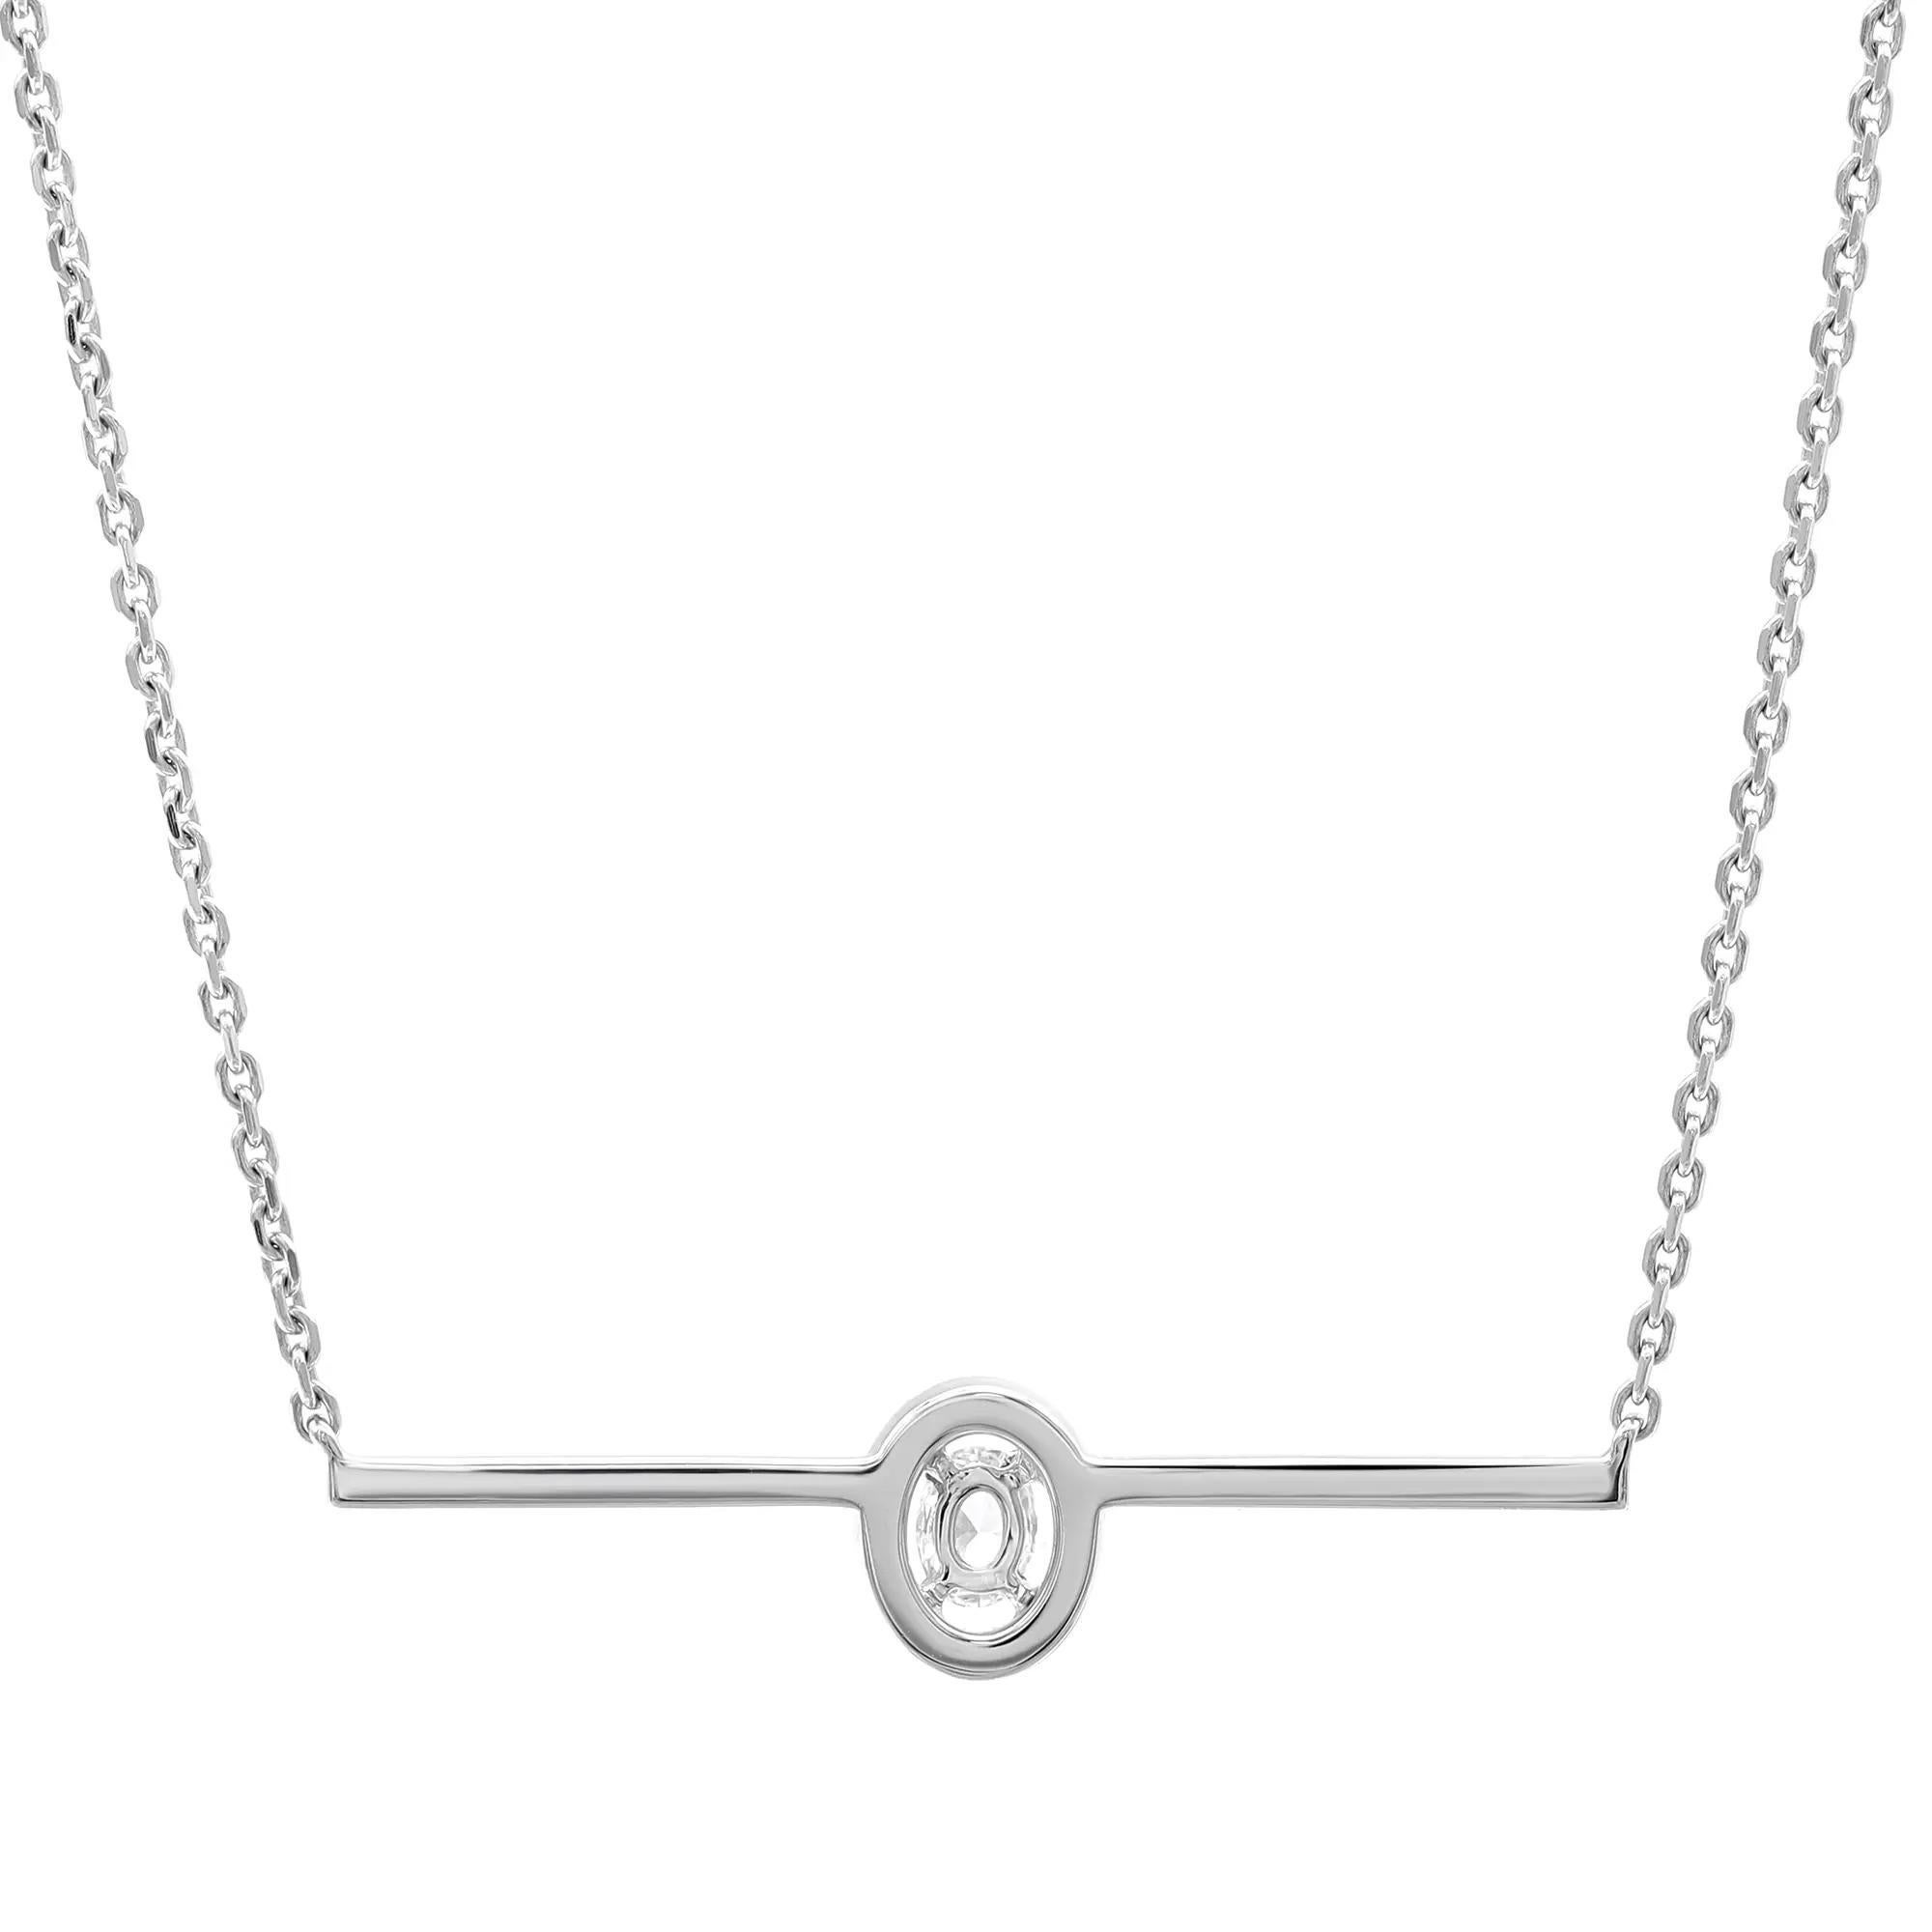 Moderne Messika 0.36Cttw Glam'Azone Diamond Chain Necklace 18K White Gold 18.5 Inches  en vente